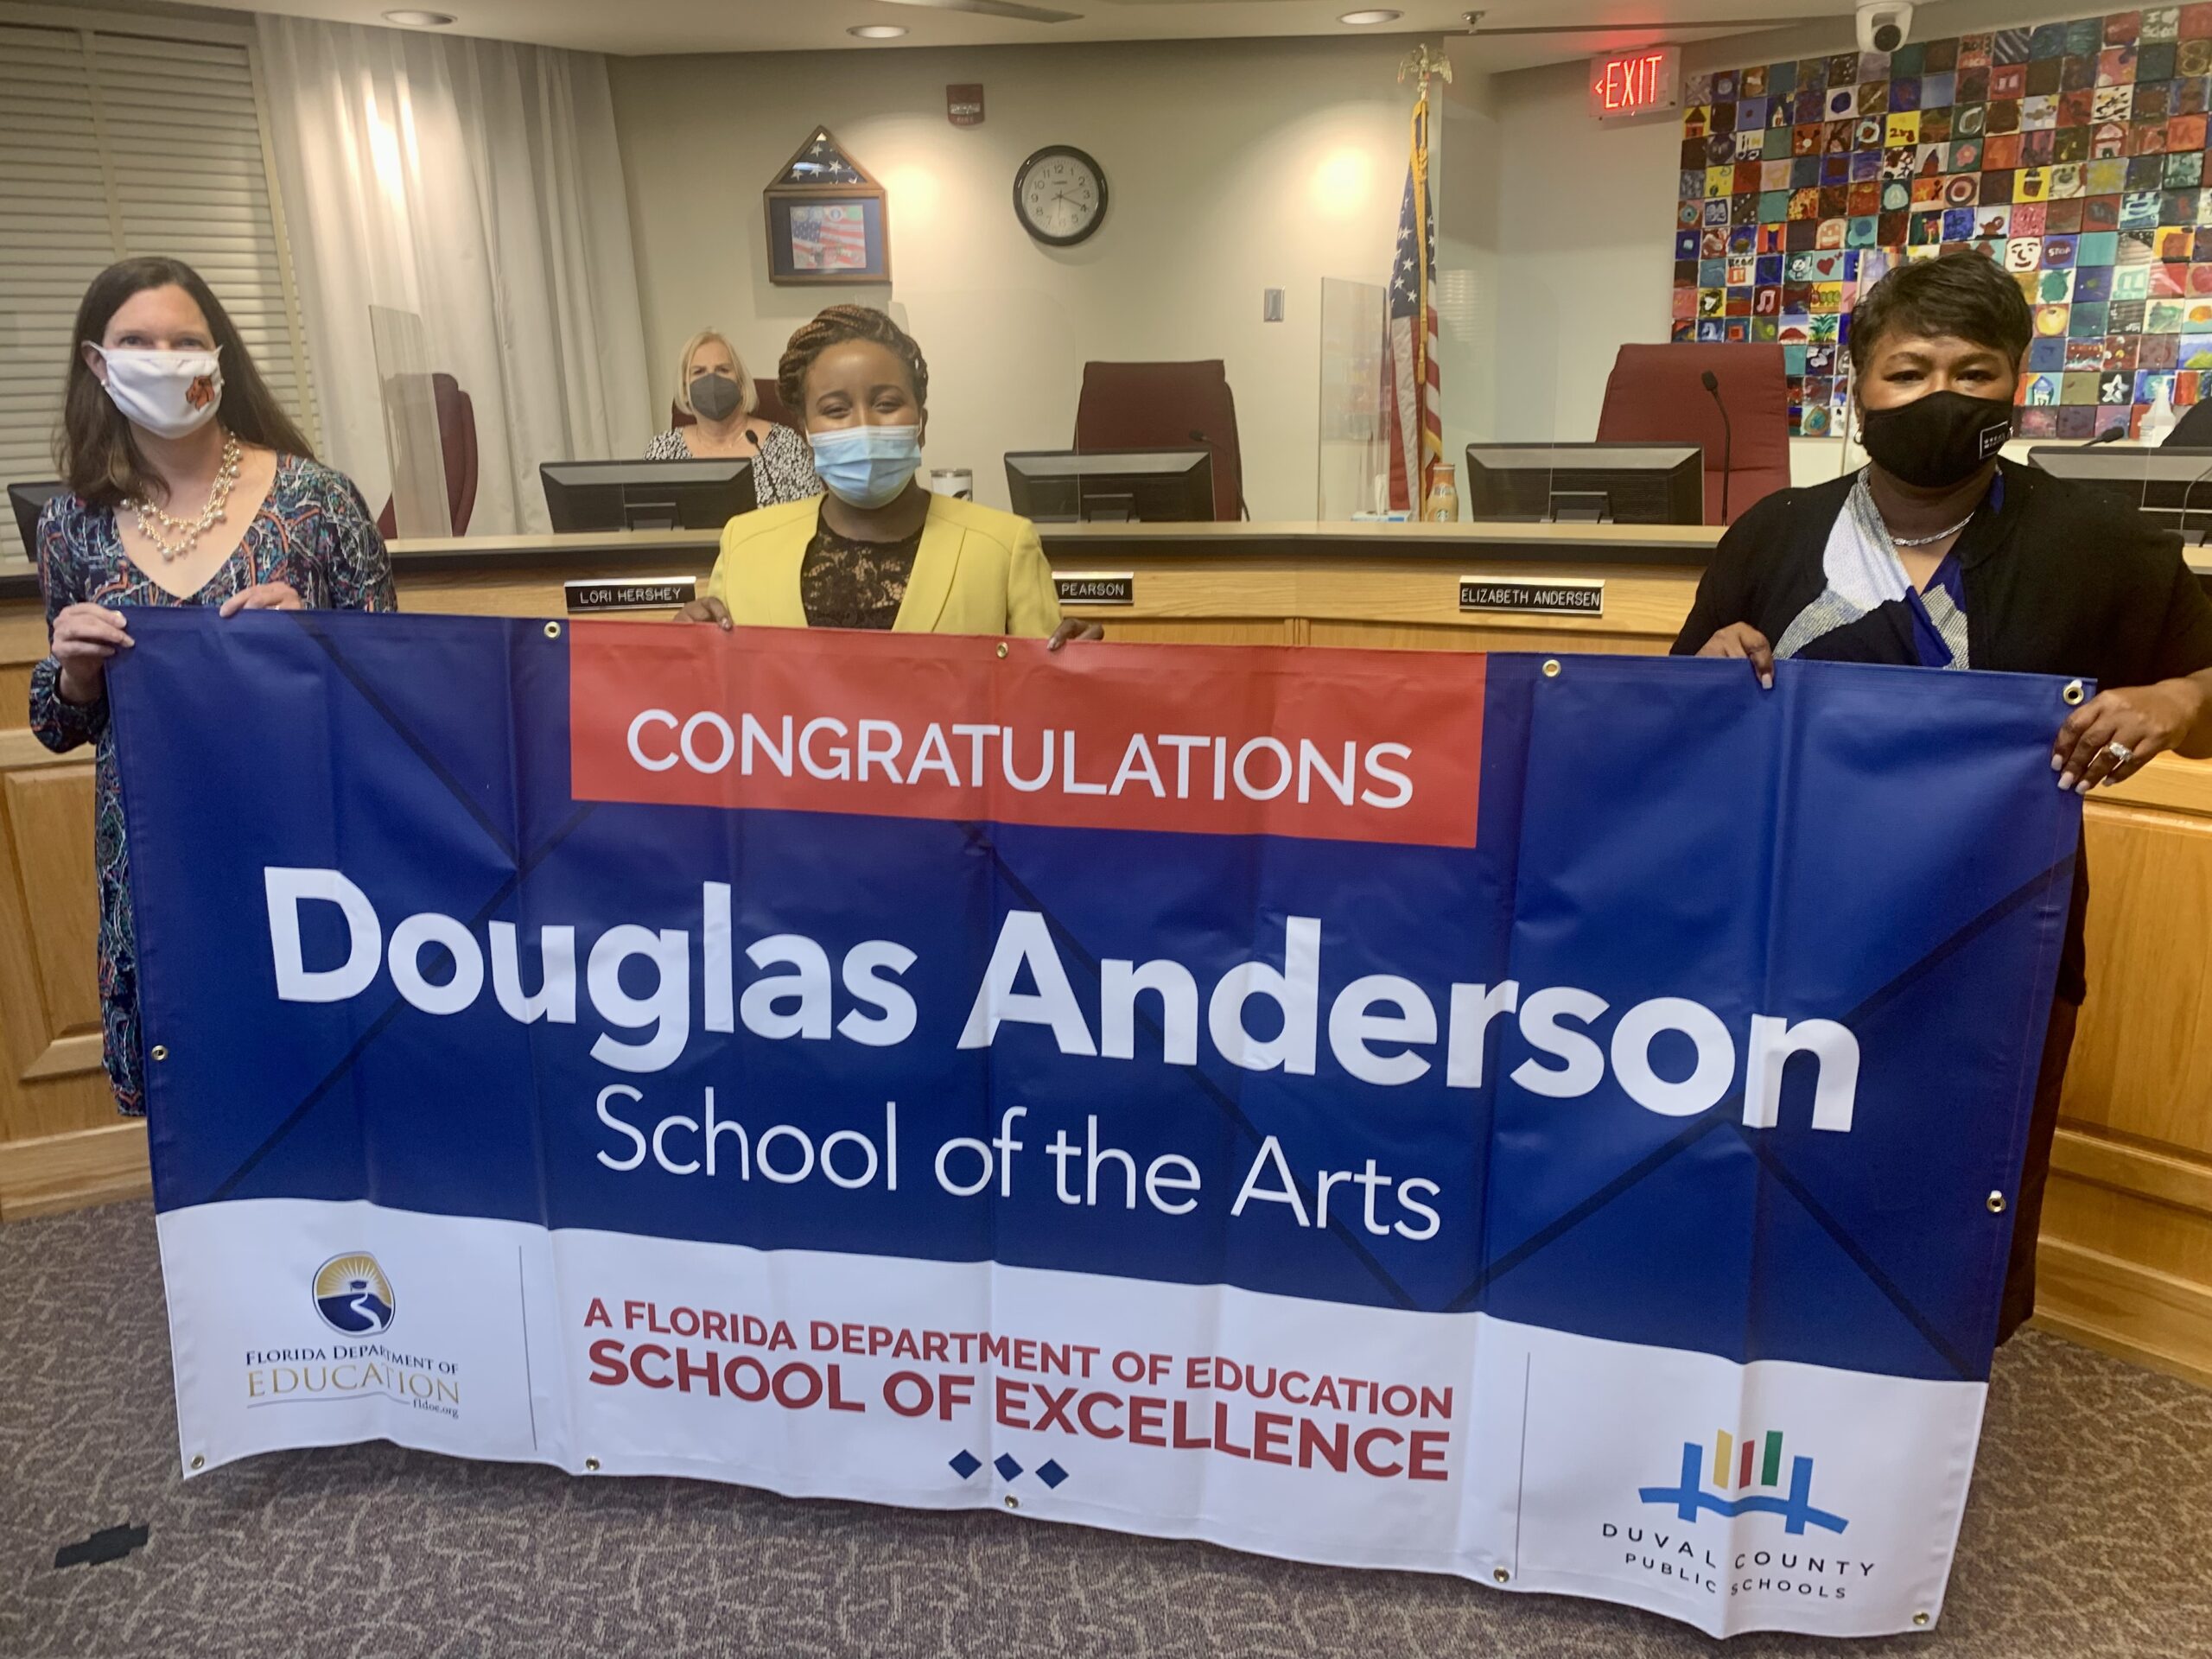 Superintendent, Board Member and school administrator hold banner Congratulations Douglas Anderson School of the Arts a Florida Department of Education School of Excellence